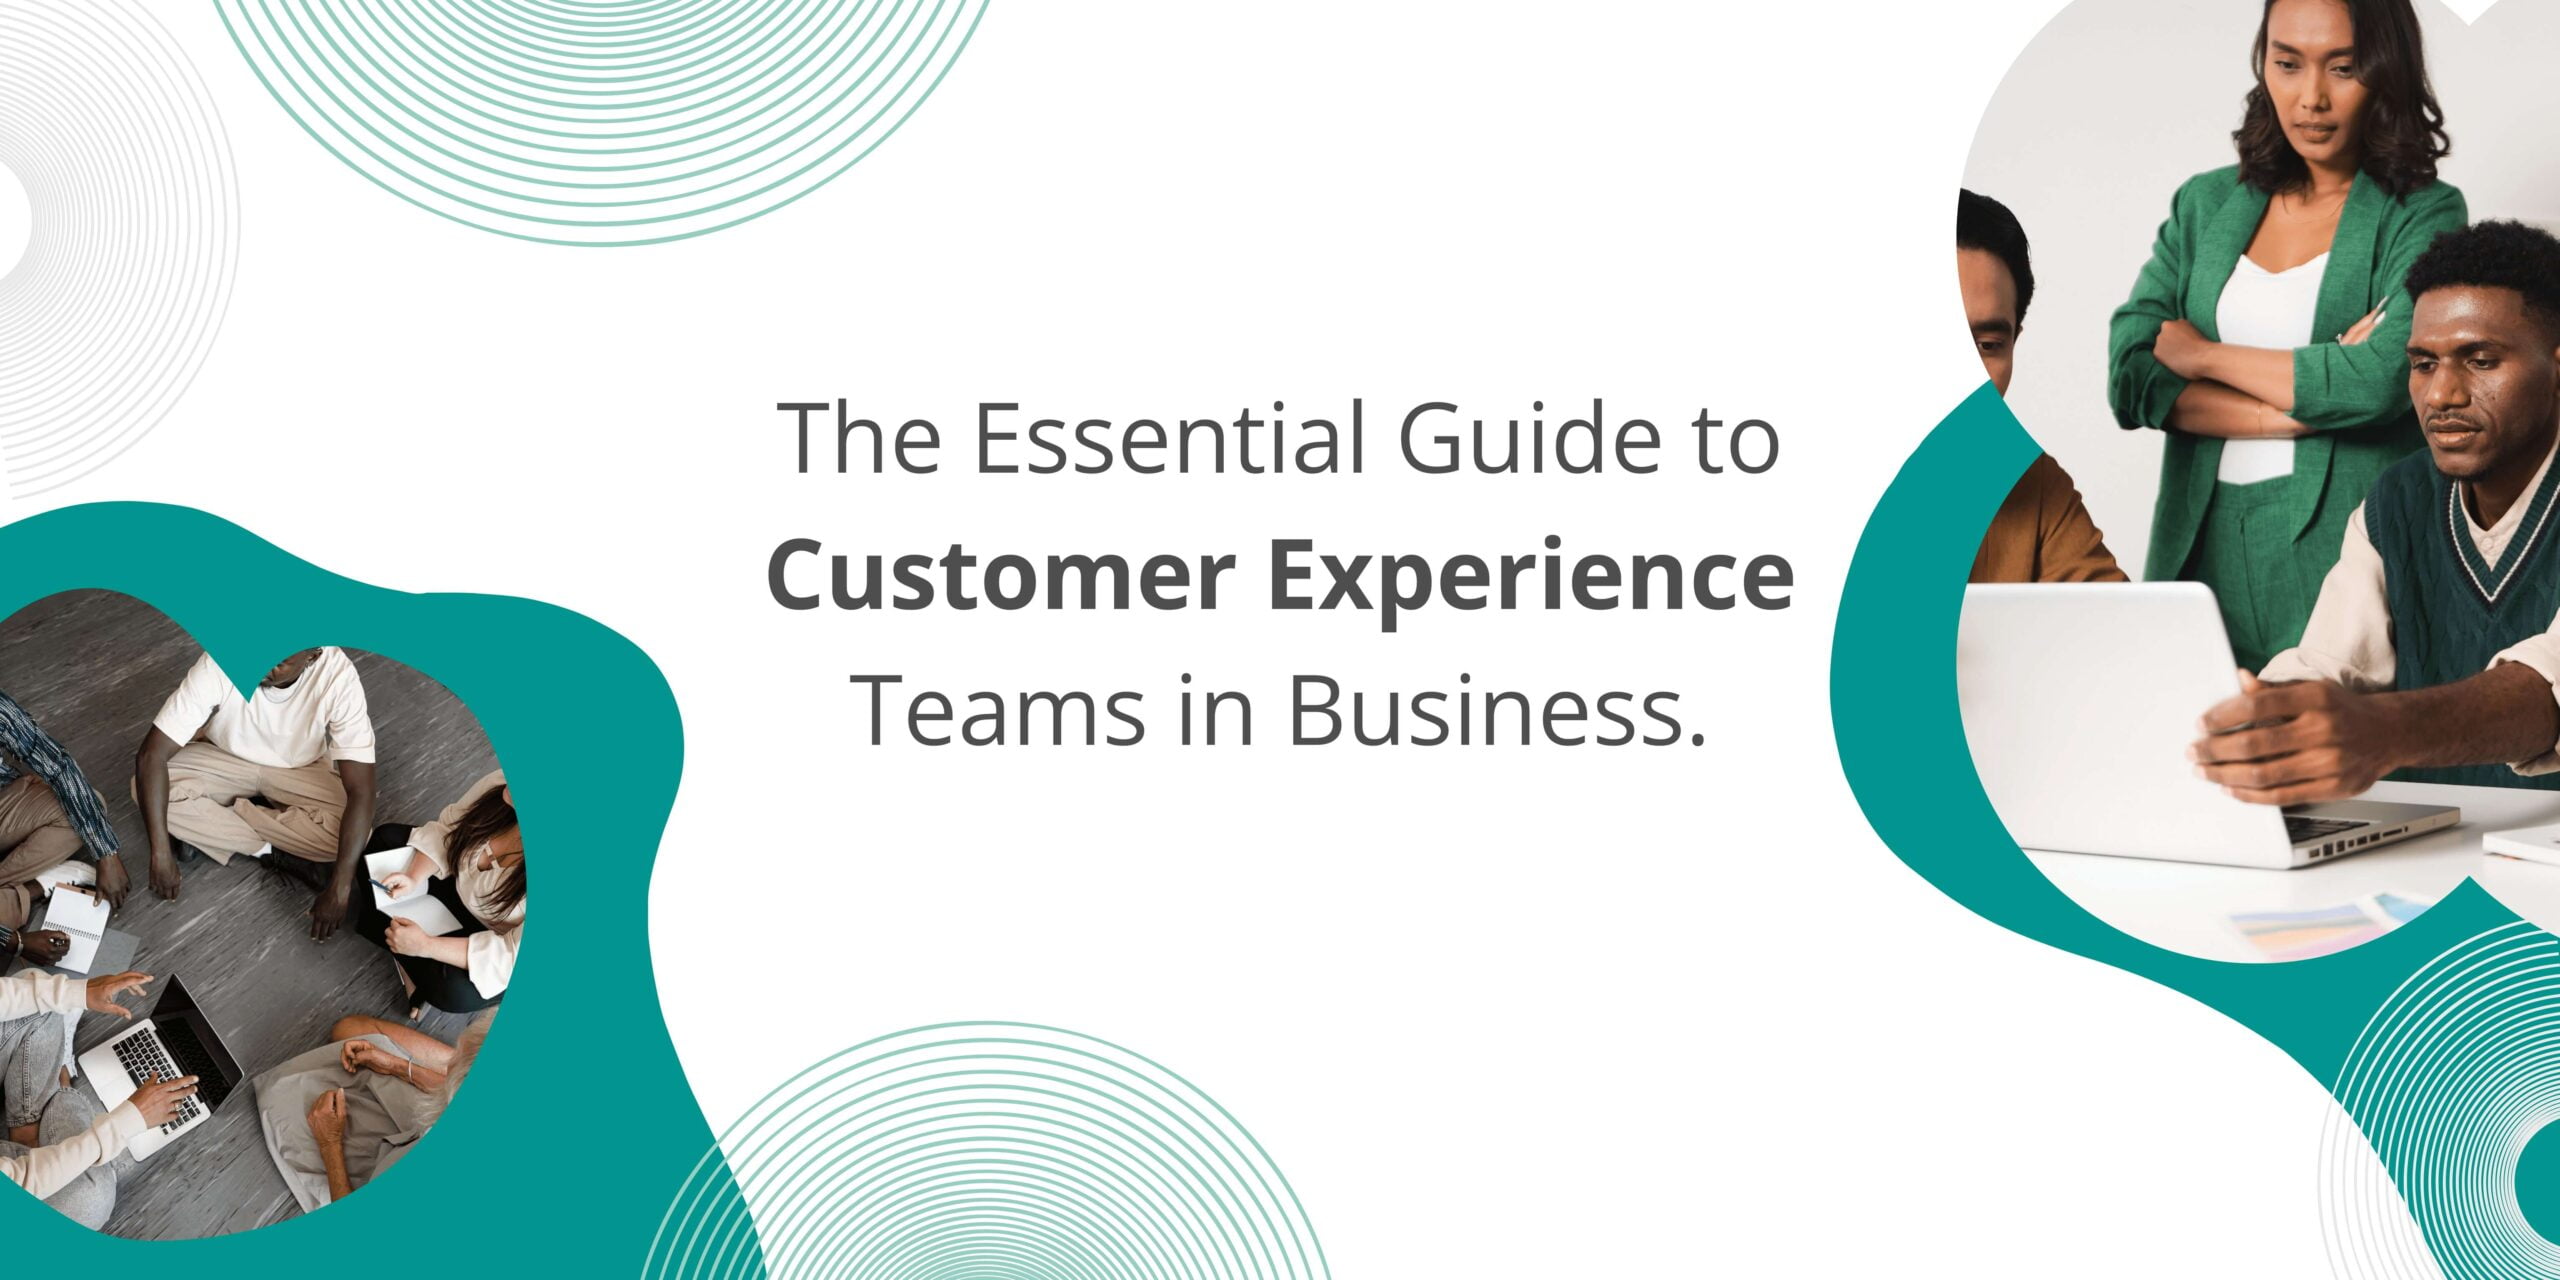 The Essential Guide to Customer Experience Teams in Business